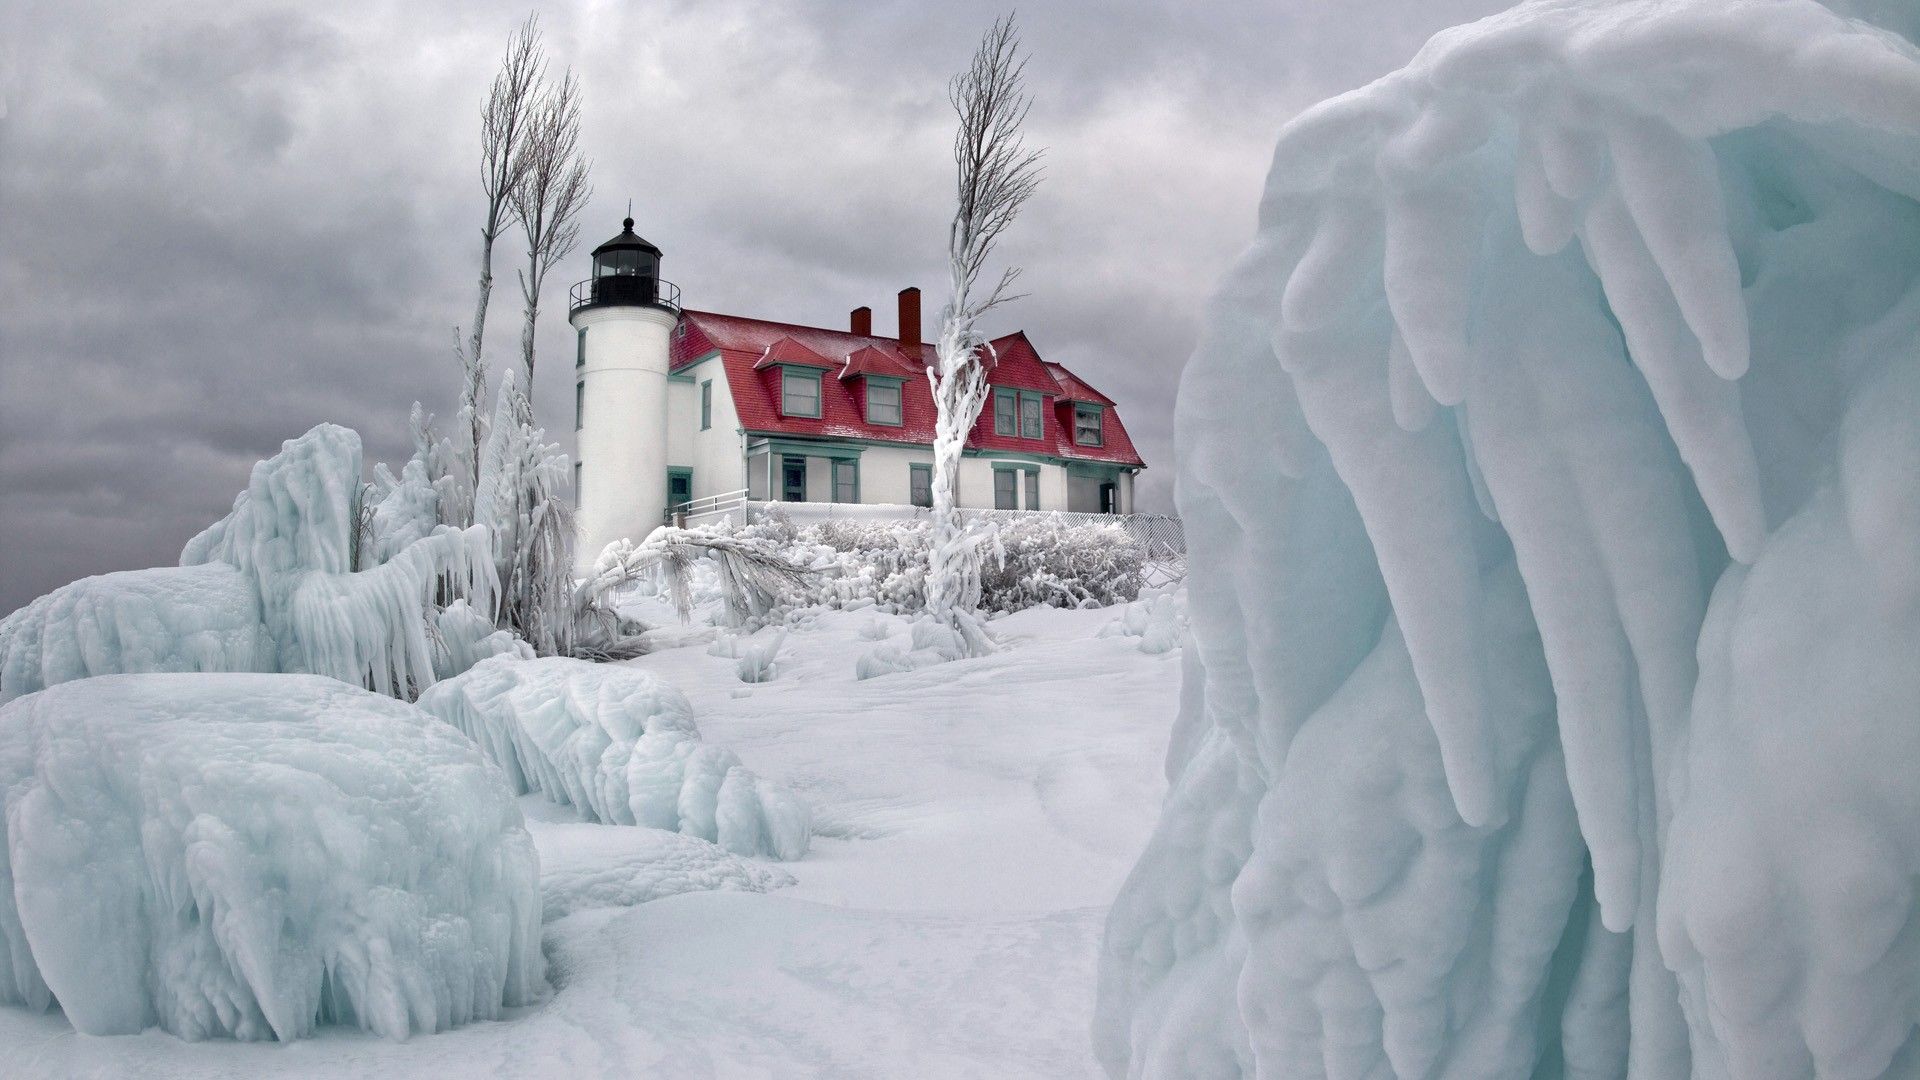 General 1920x1080 landscape ice winter snow cold outdoors lighthouse